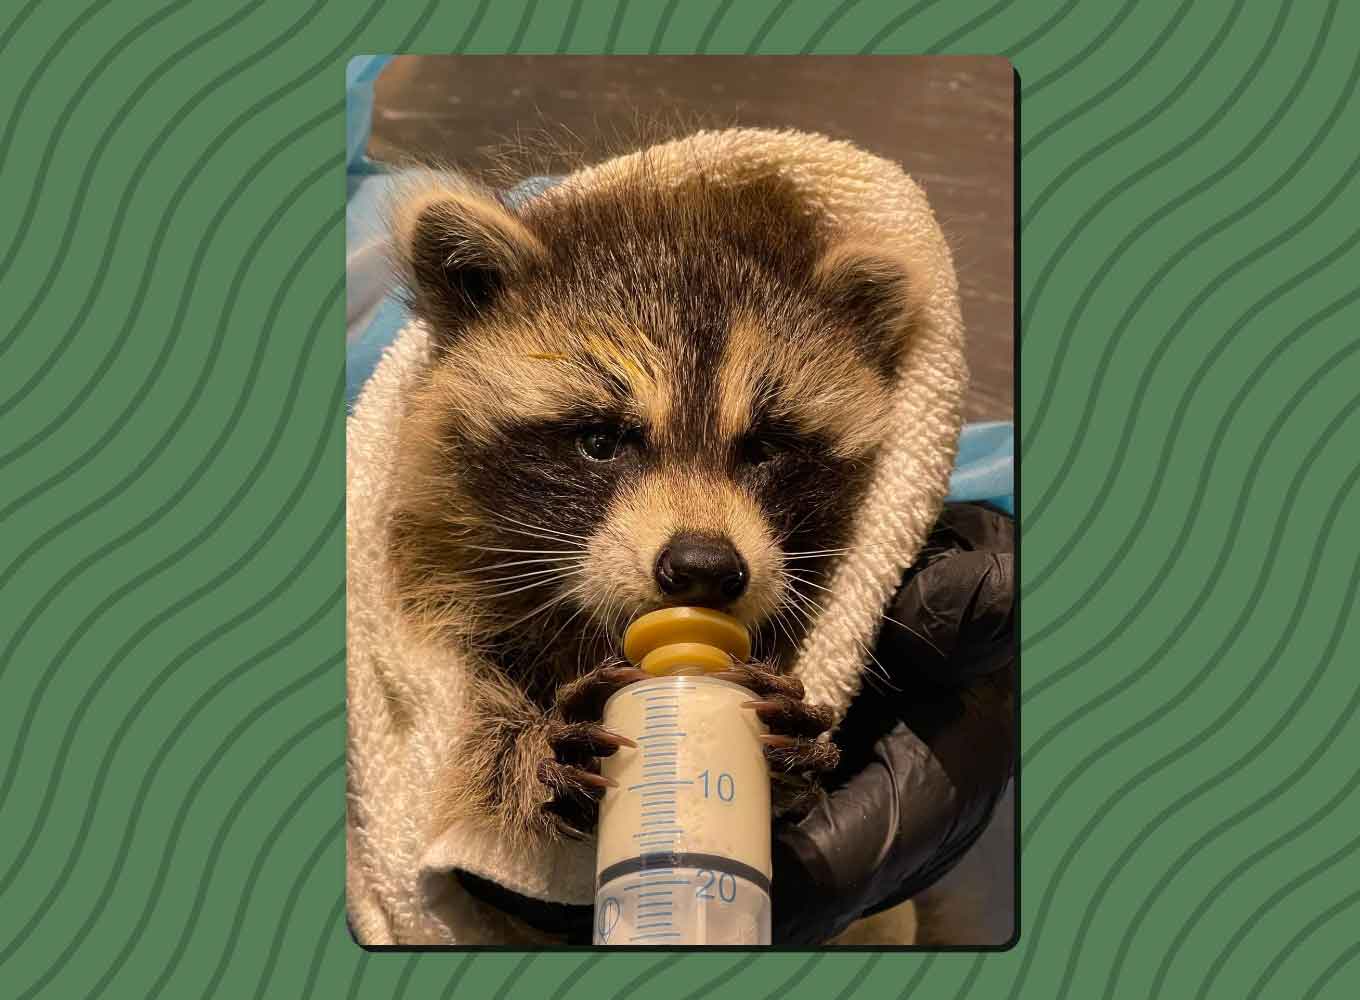 A baby raccoon is wrapped in a towel, drinking from a bottle